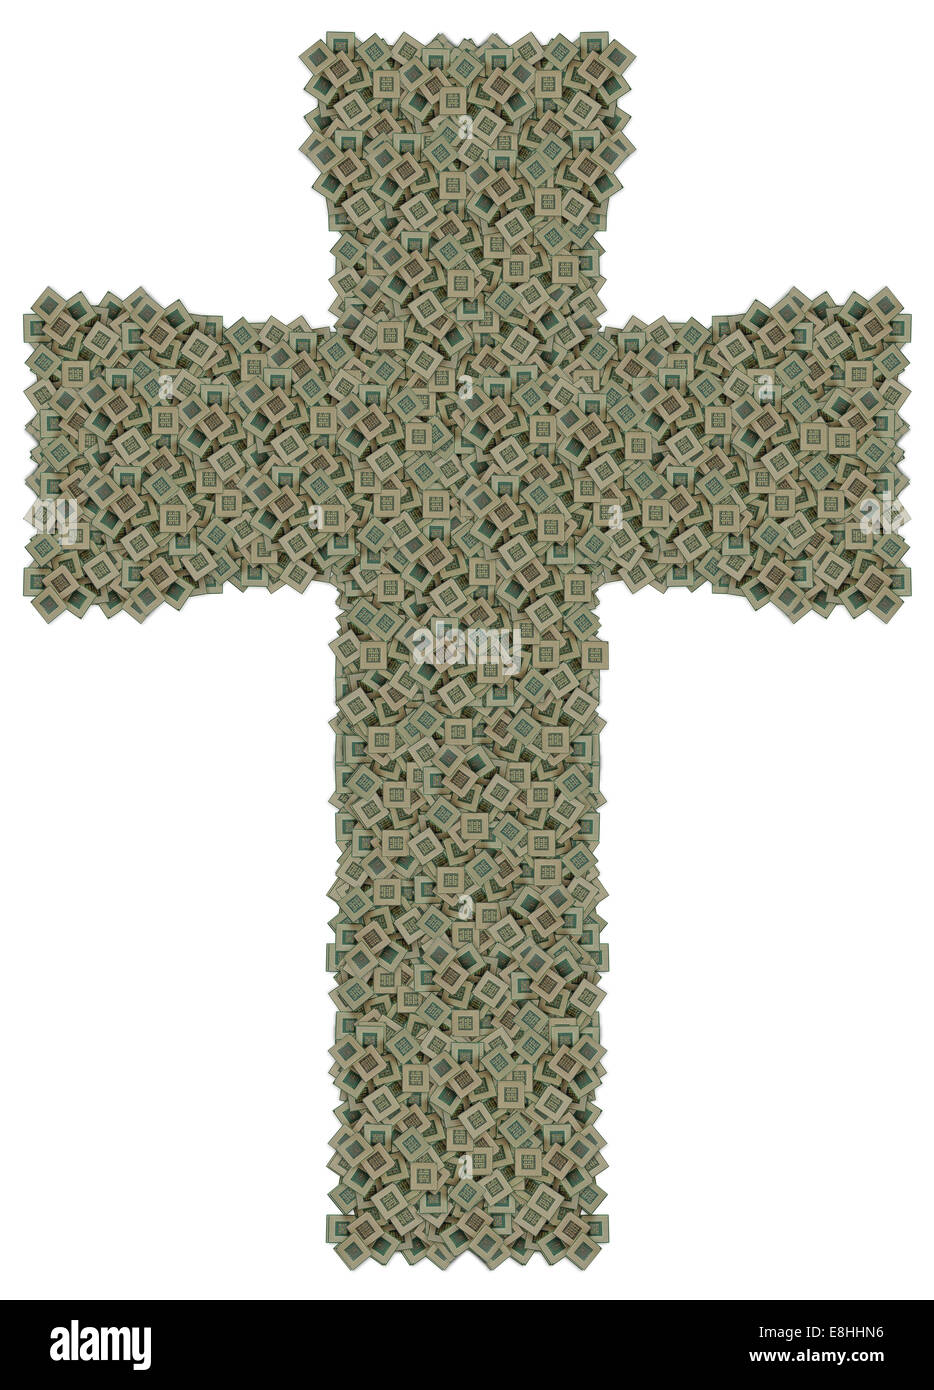 Cross made of old and dirty microprocessors Stock Photo